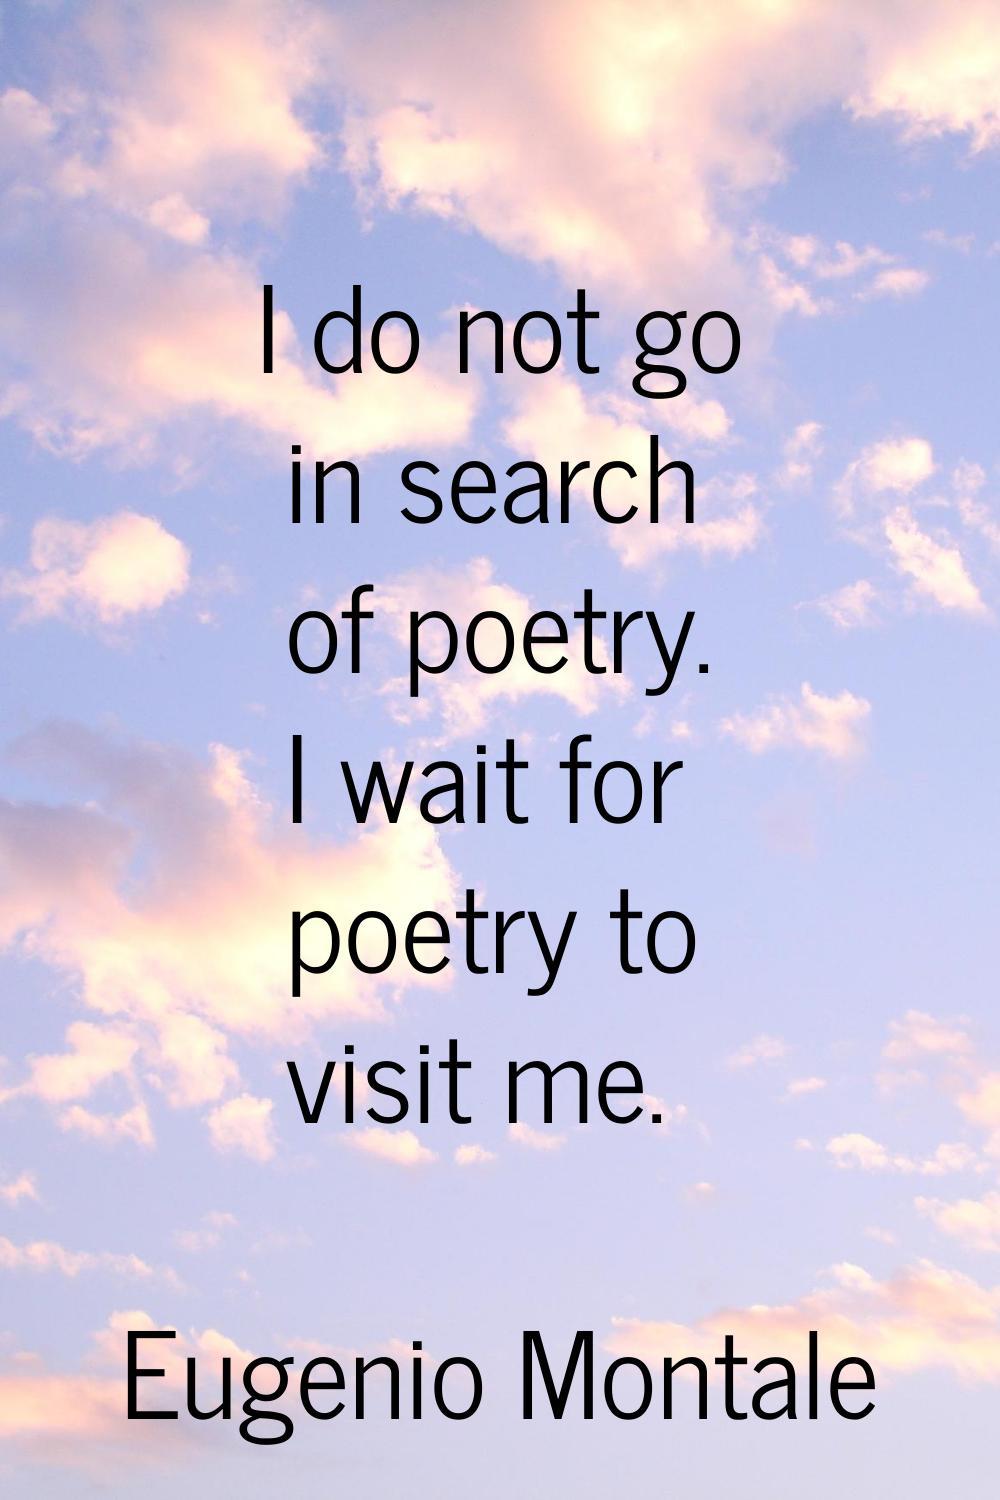 I do not go in search of poetry. I wait for poetry to visit me.